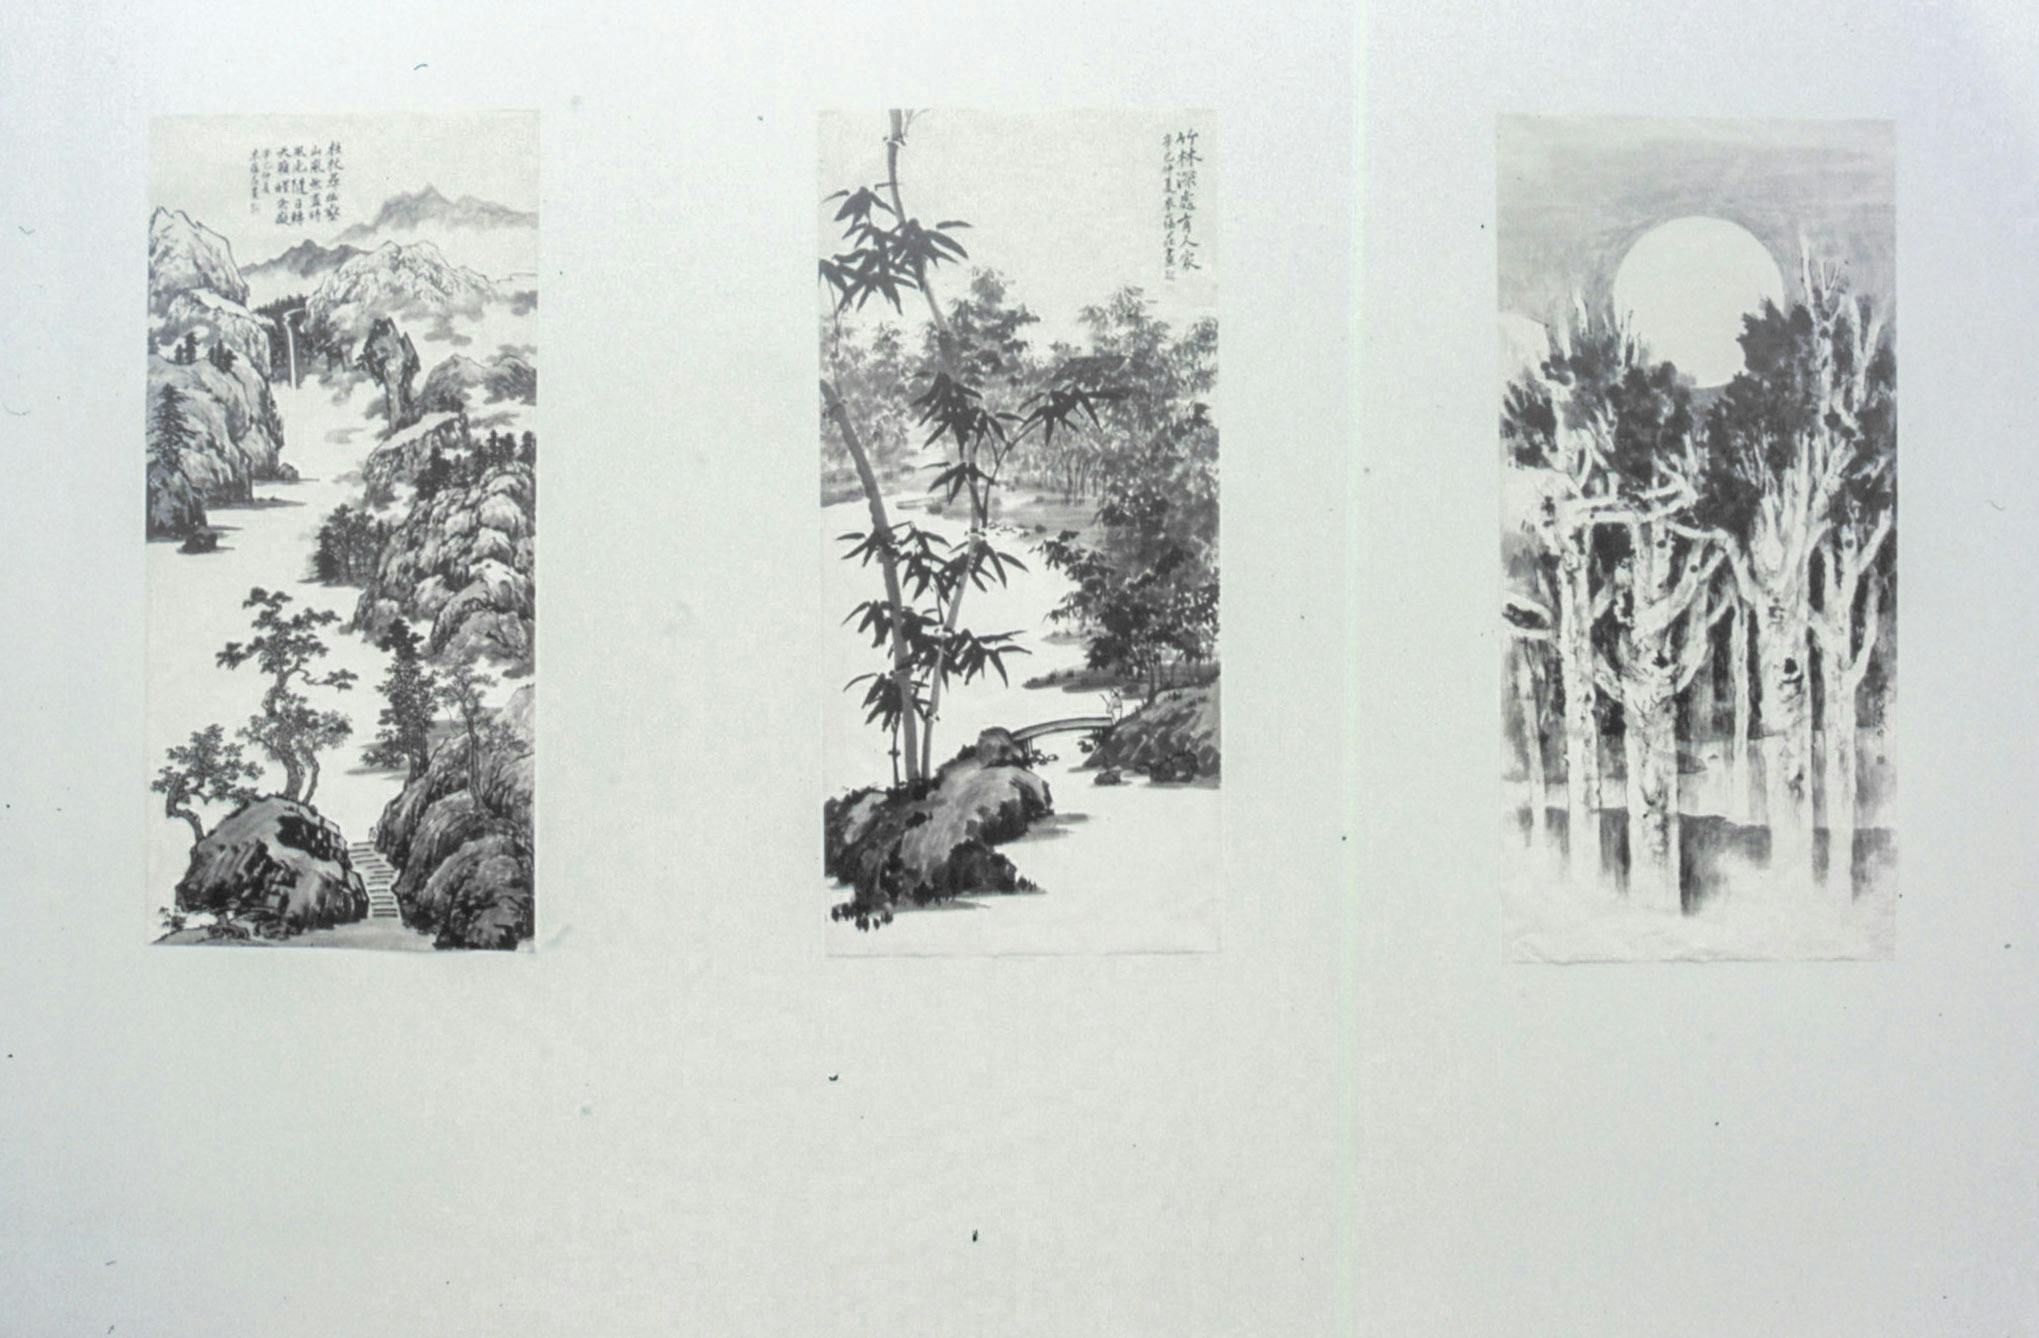 Three black ink landscape paintings are mounted on the gallery wall. They are long hanging scroll paintings. The moon above bear woods, bamboo trees, and rocky mountains are depicted in the painting.